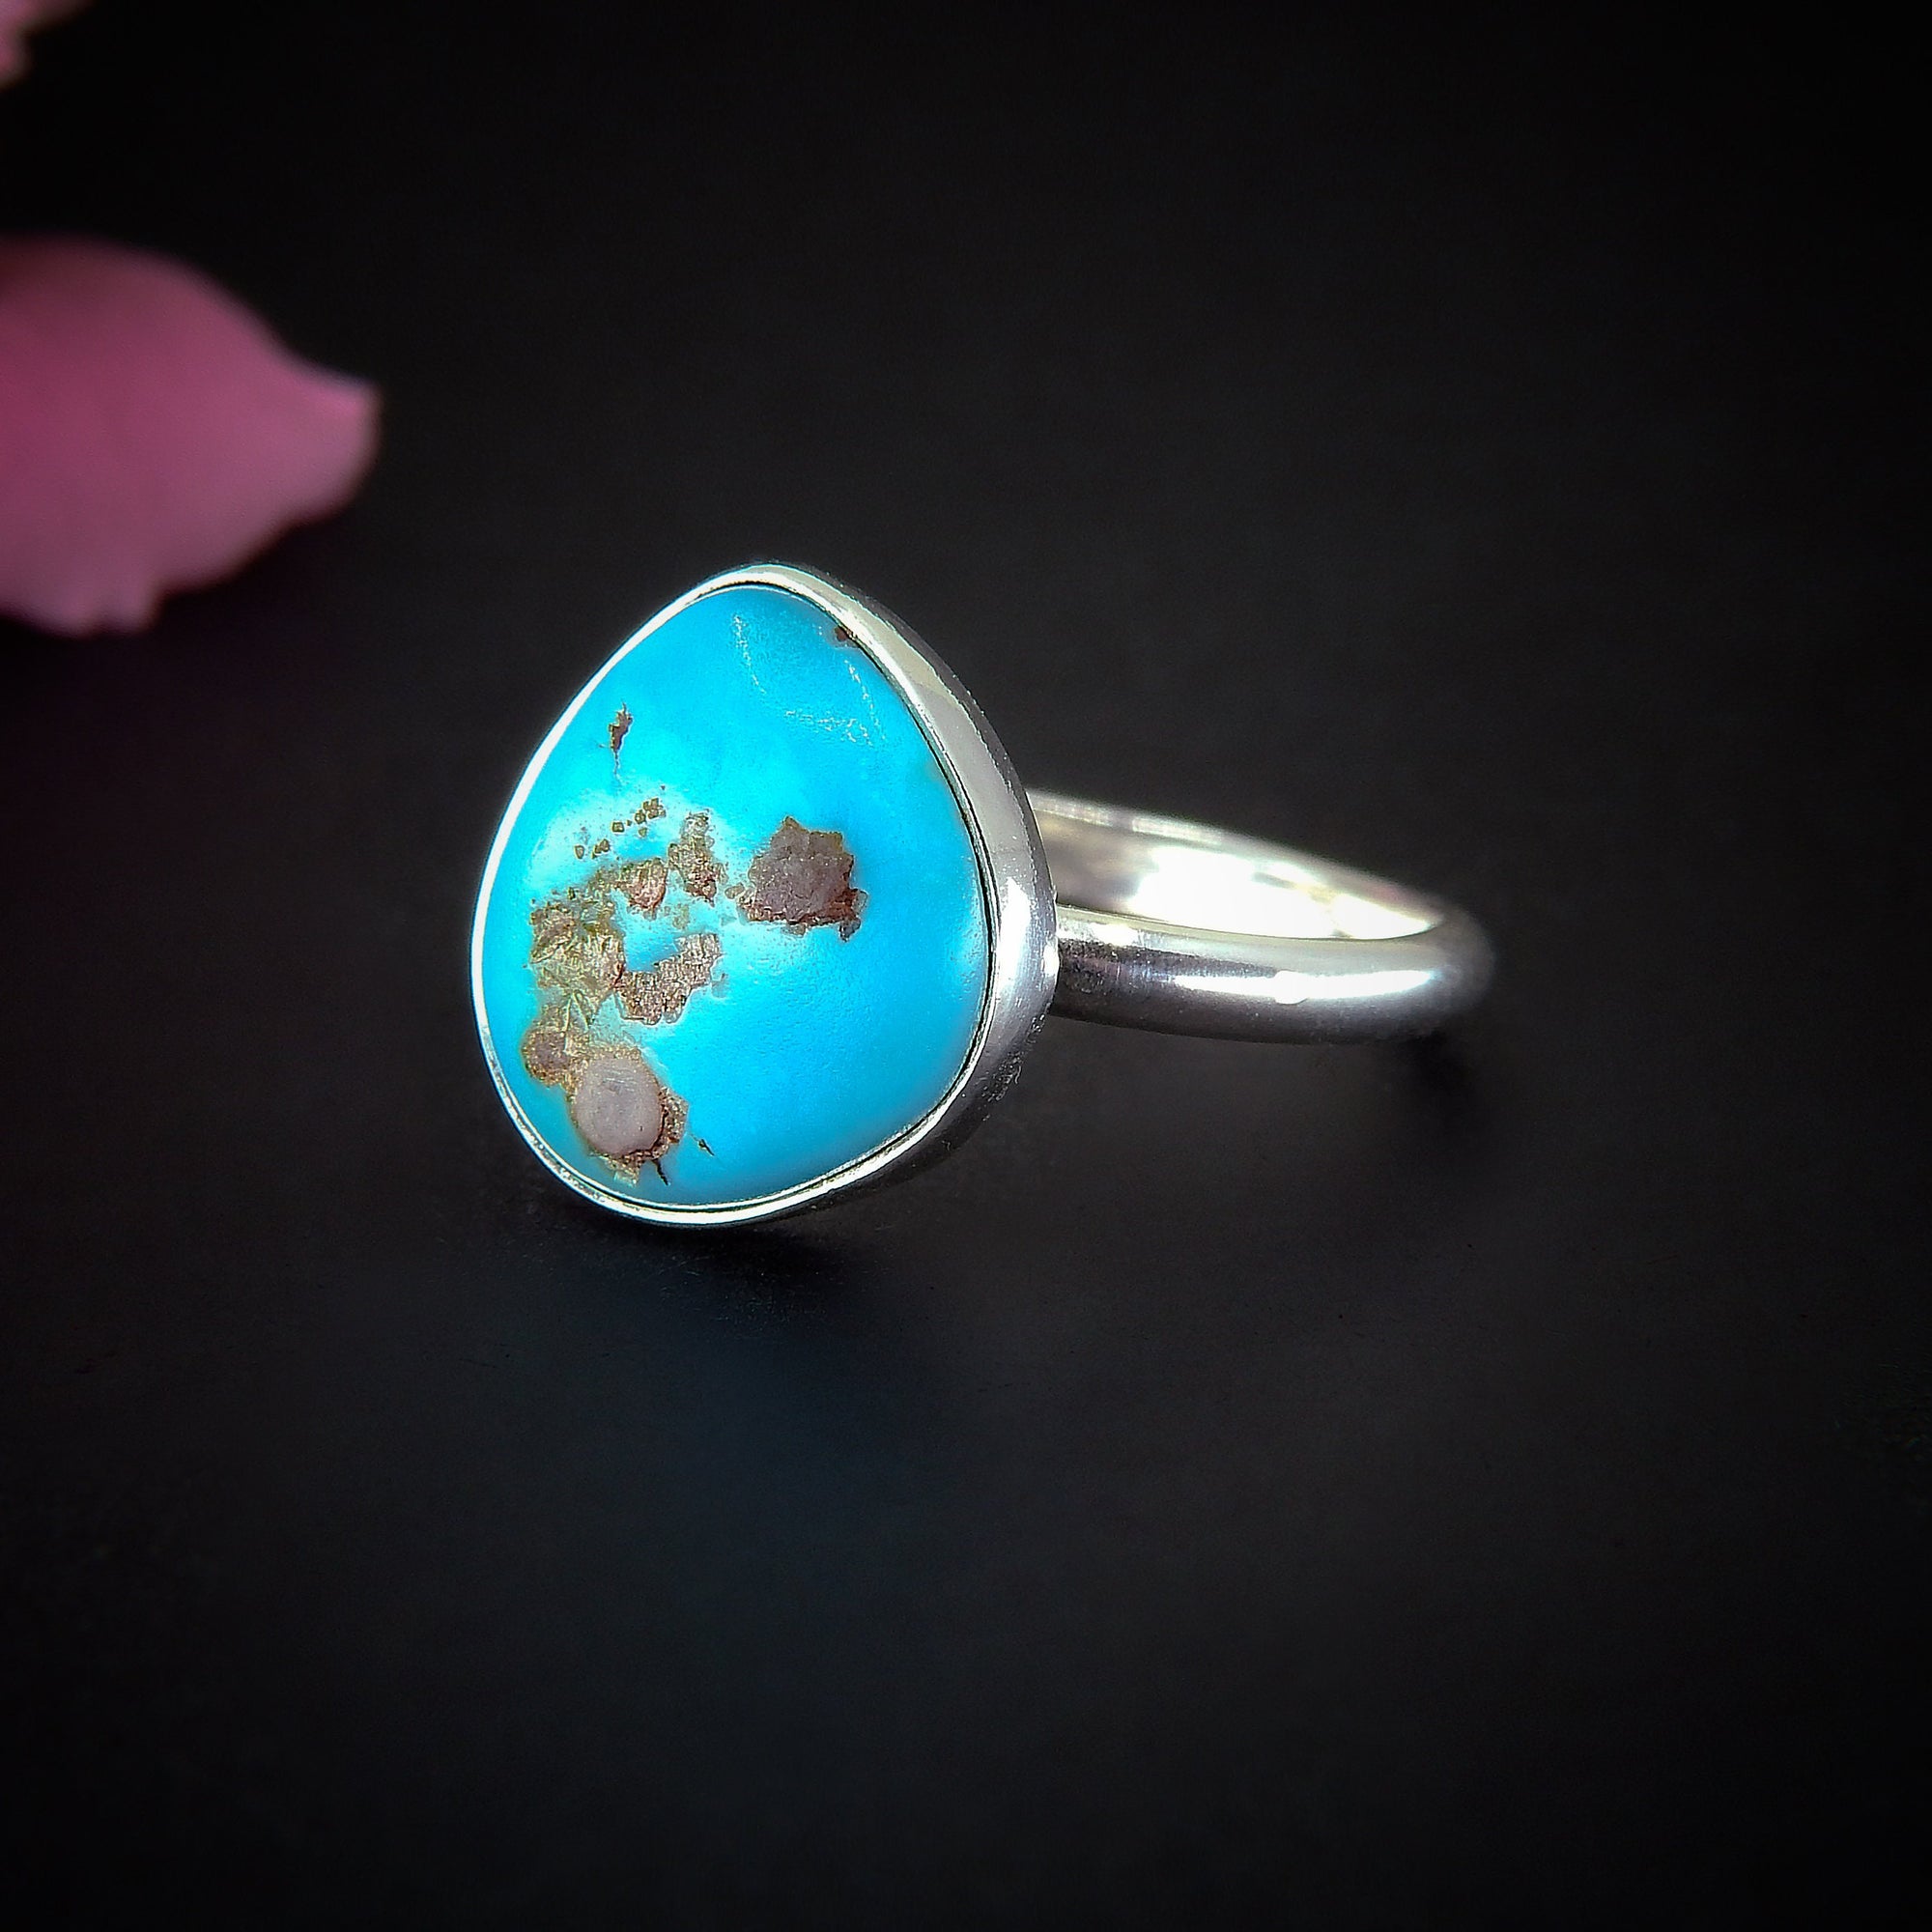 Blue Morenci Turquoise Ring - Size 9 - Sterling Silver - Genuine Turquoise Jewellery - Bright Blue Turquoise Ring - Real Turquoise Ring OOAK